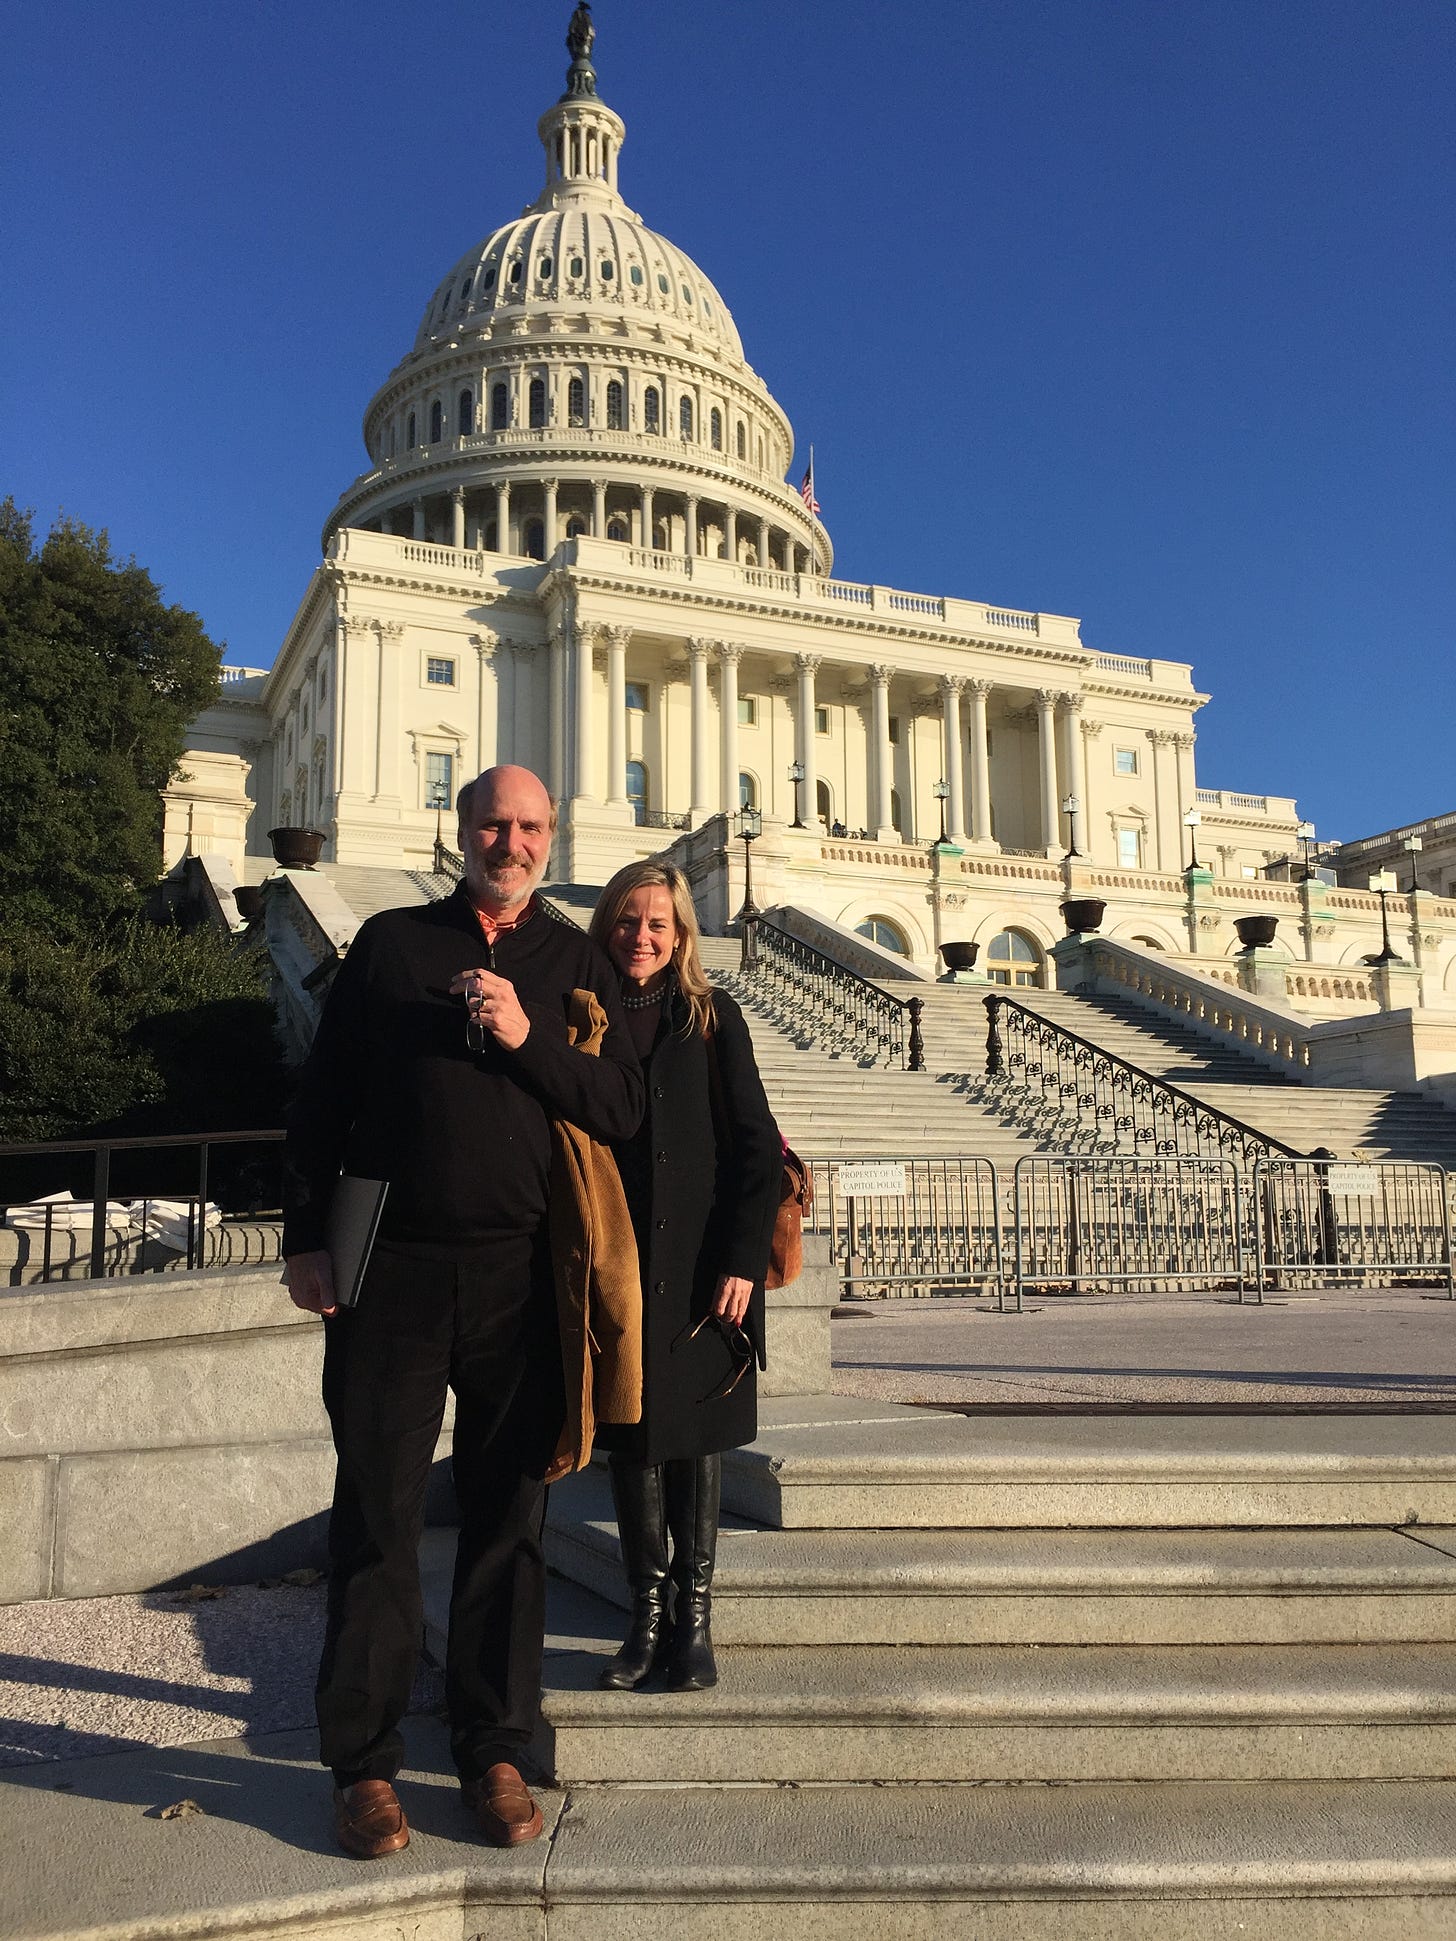 Man and woman stand on steps of the nation's capitol